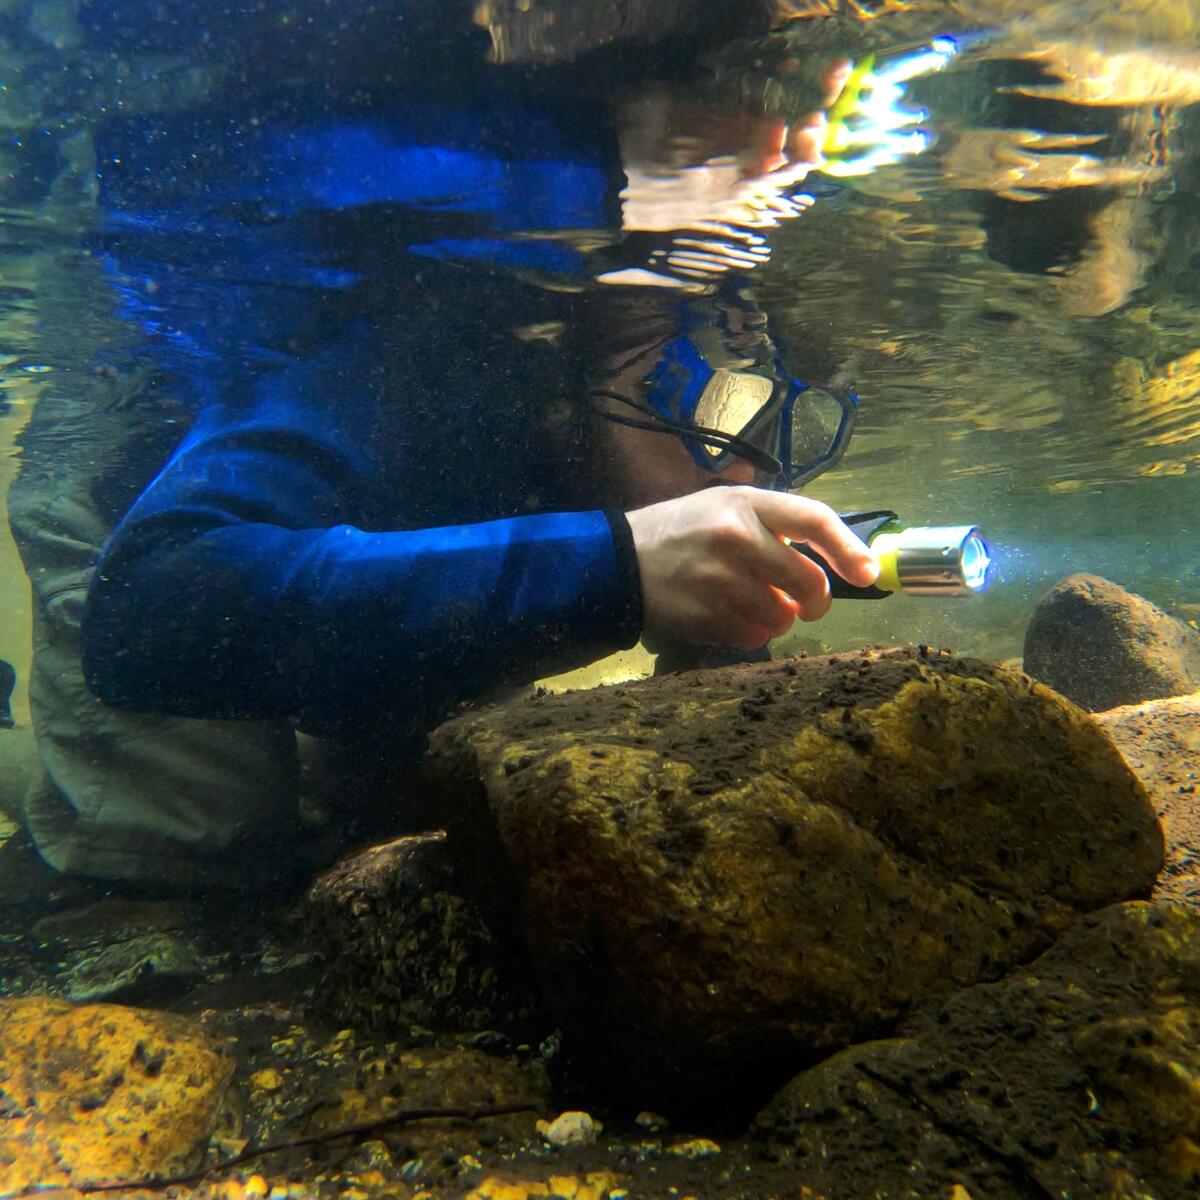 Scuba diver submerged in water holding a flashlight